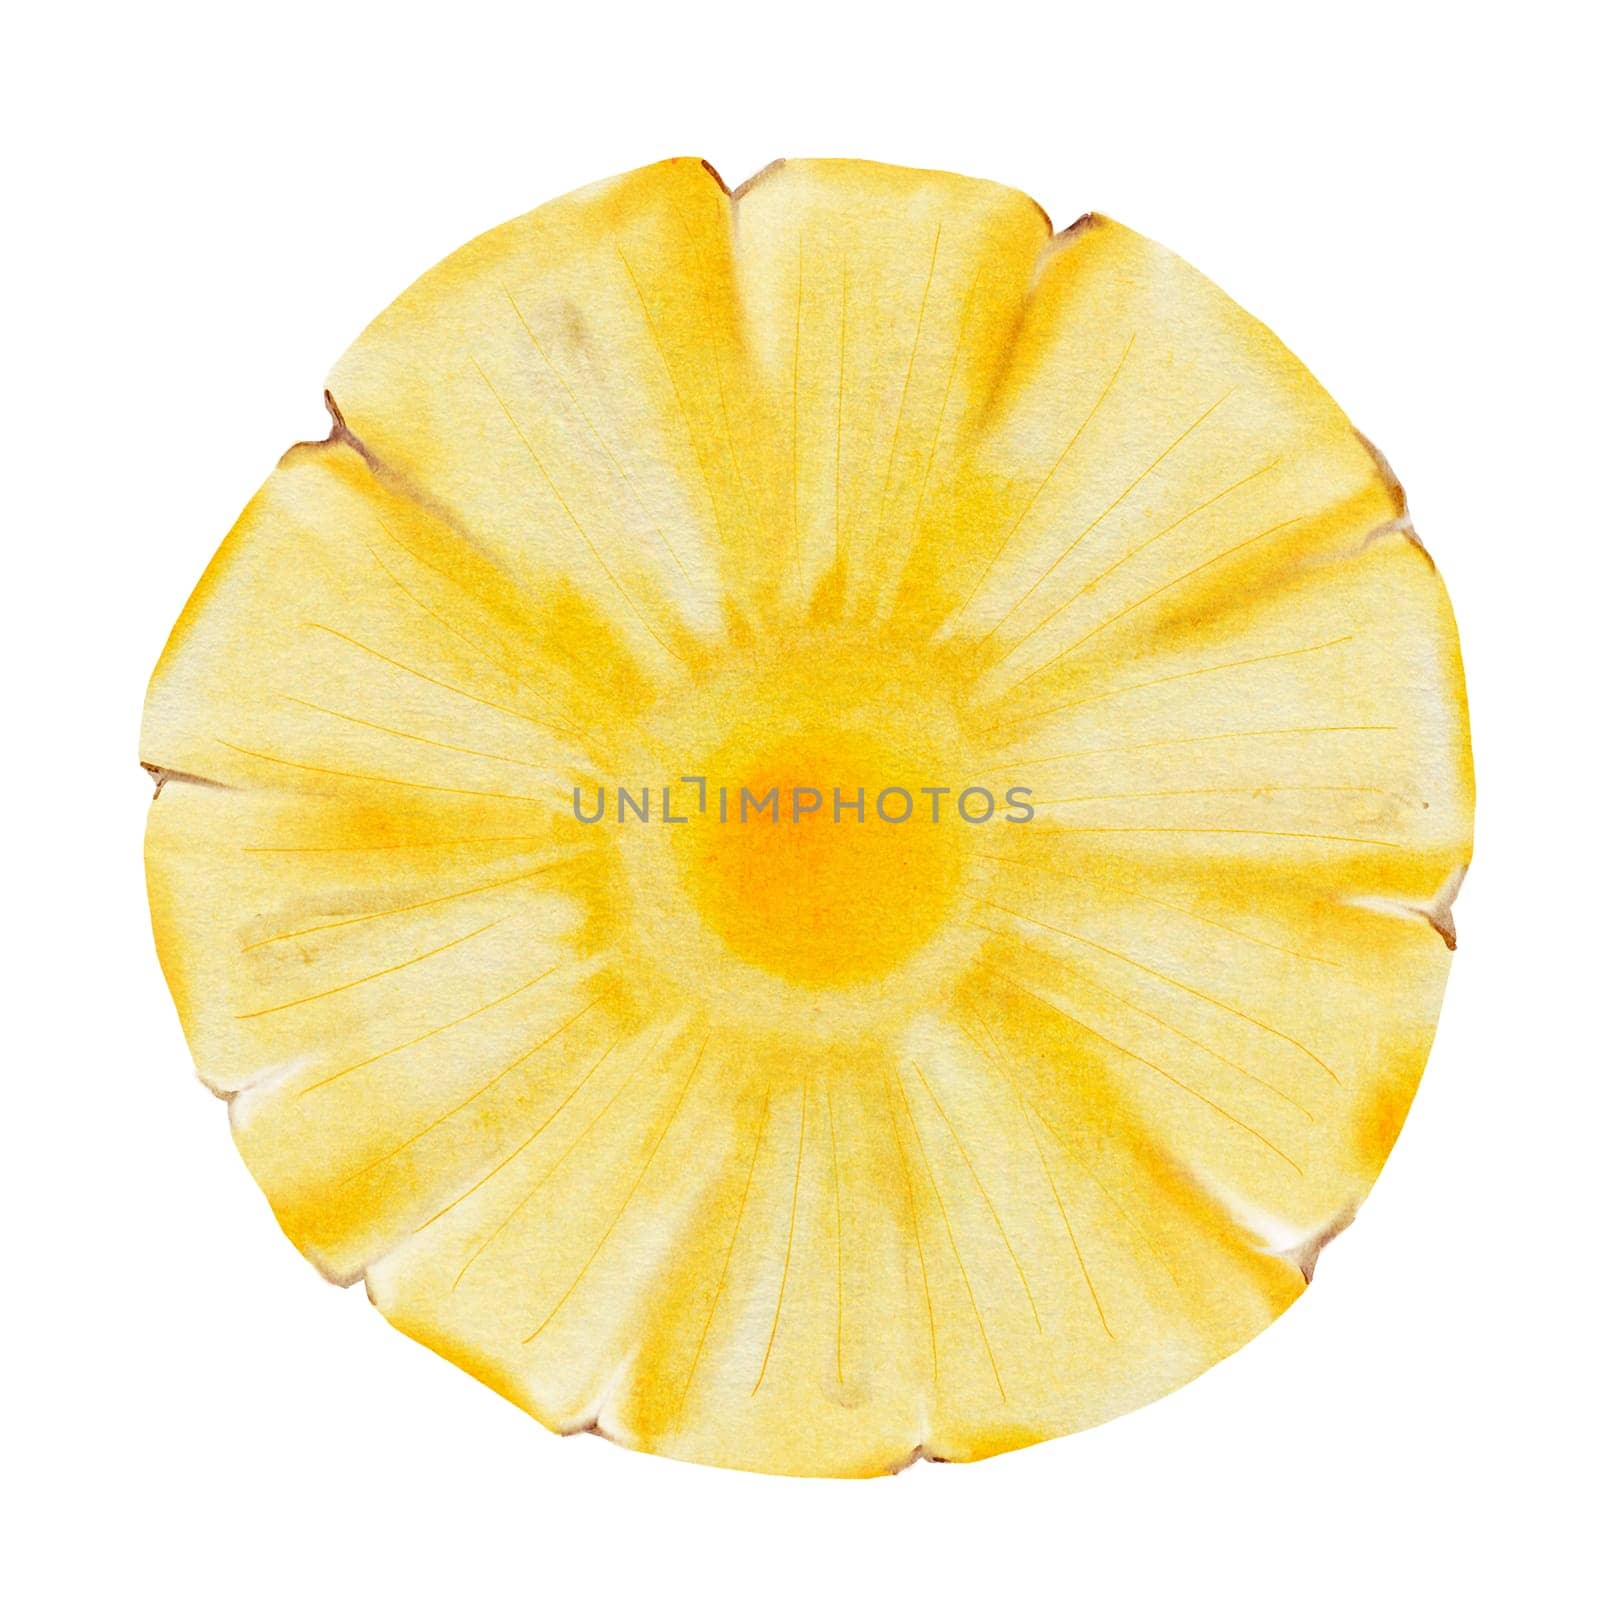 Pineapple watercolor. Clip art isolated on white background of exotic fruit. For cocktail menus, vegan recipes and packaging design for natural cosmetics. High quality illustration